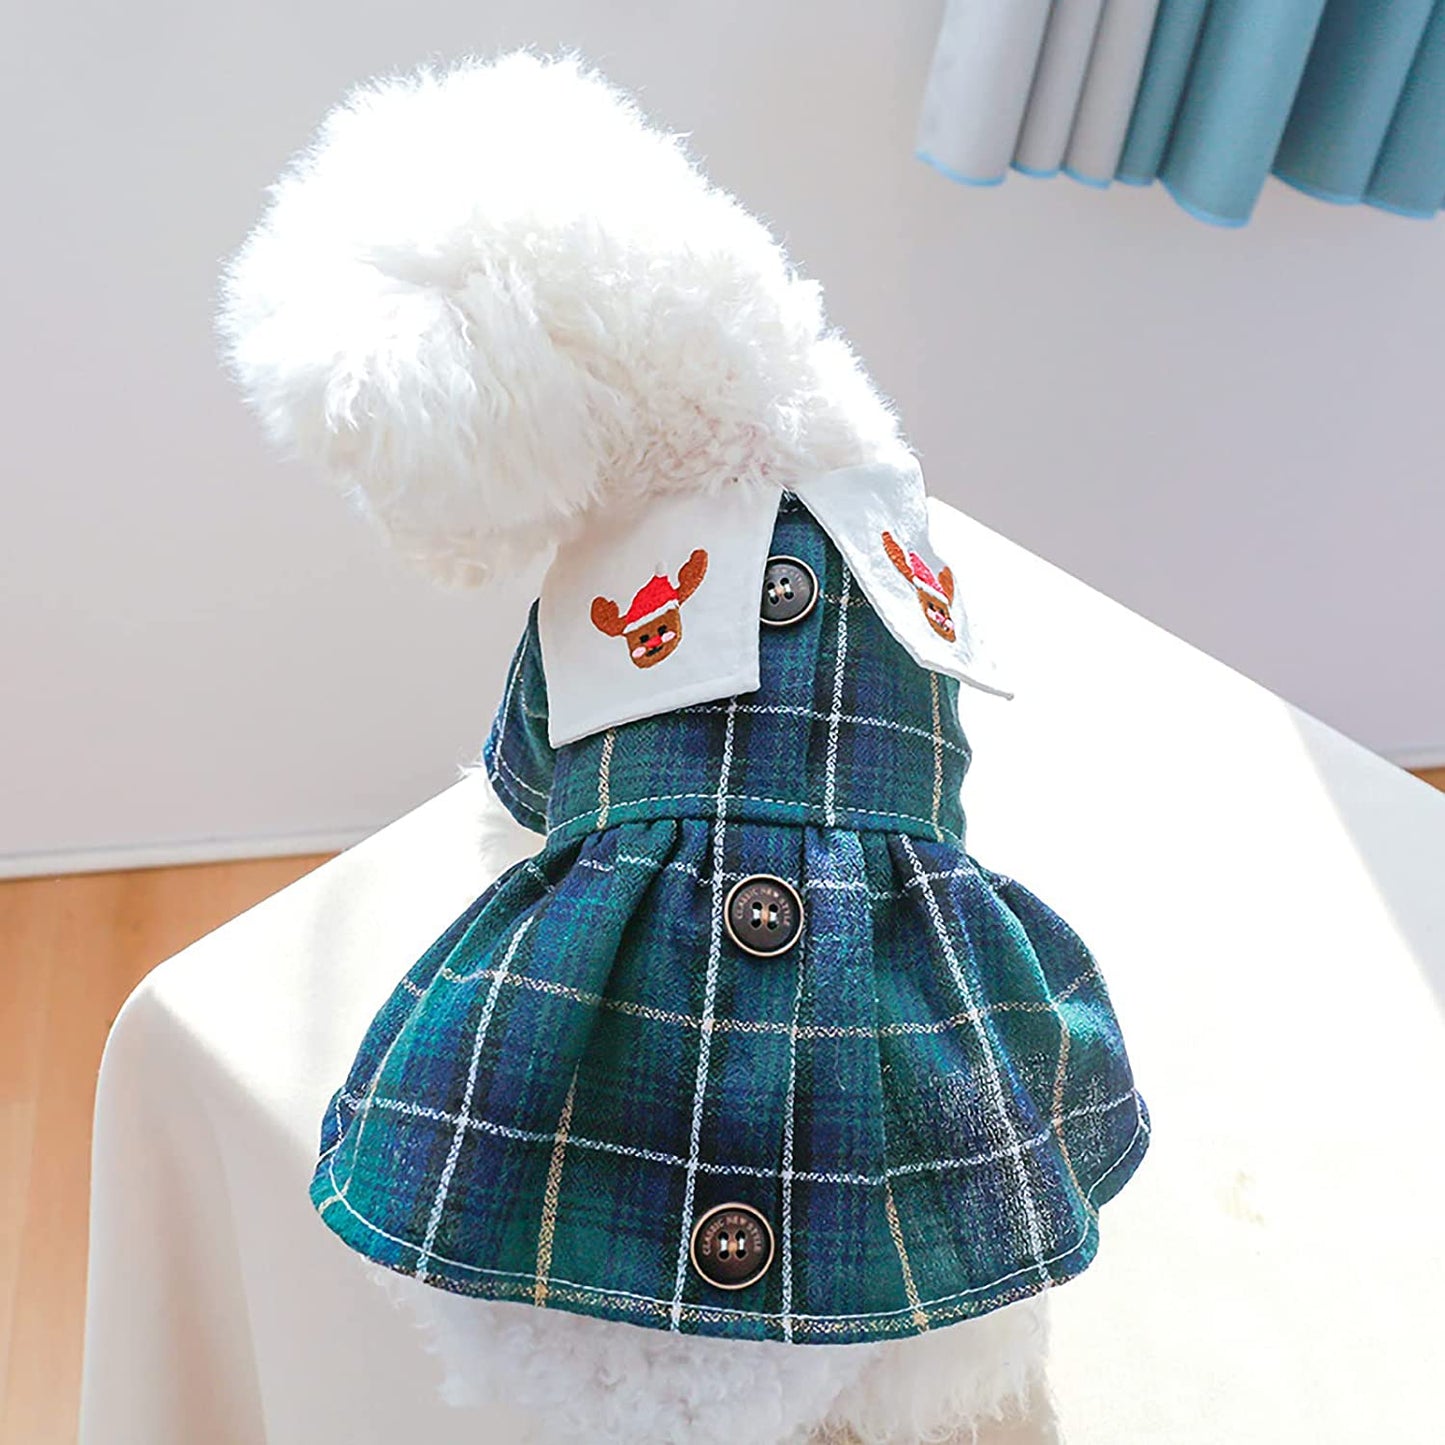 XGDMEIL Pet Cat Dog Dress for Puppies and Small Dogs Cats Girls Cute Xmas Elk Plaid Kitten Puppy Dress Dog Princess Skirt Costume New Year Christmas Holiday Party Daily Wearing Apparel (Green,M)